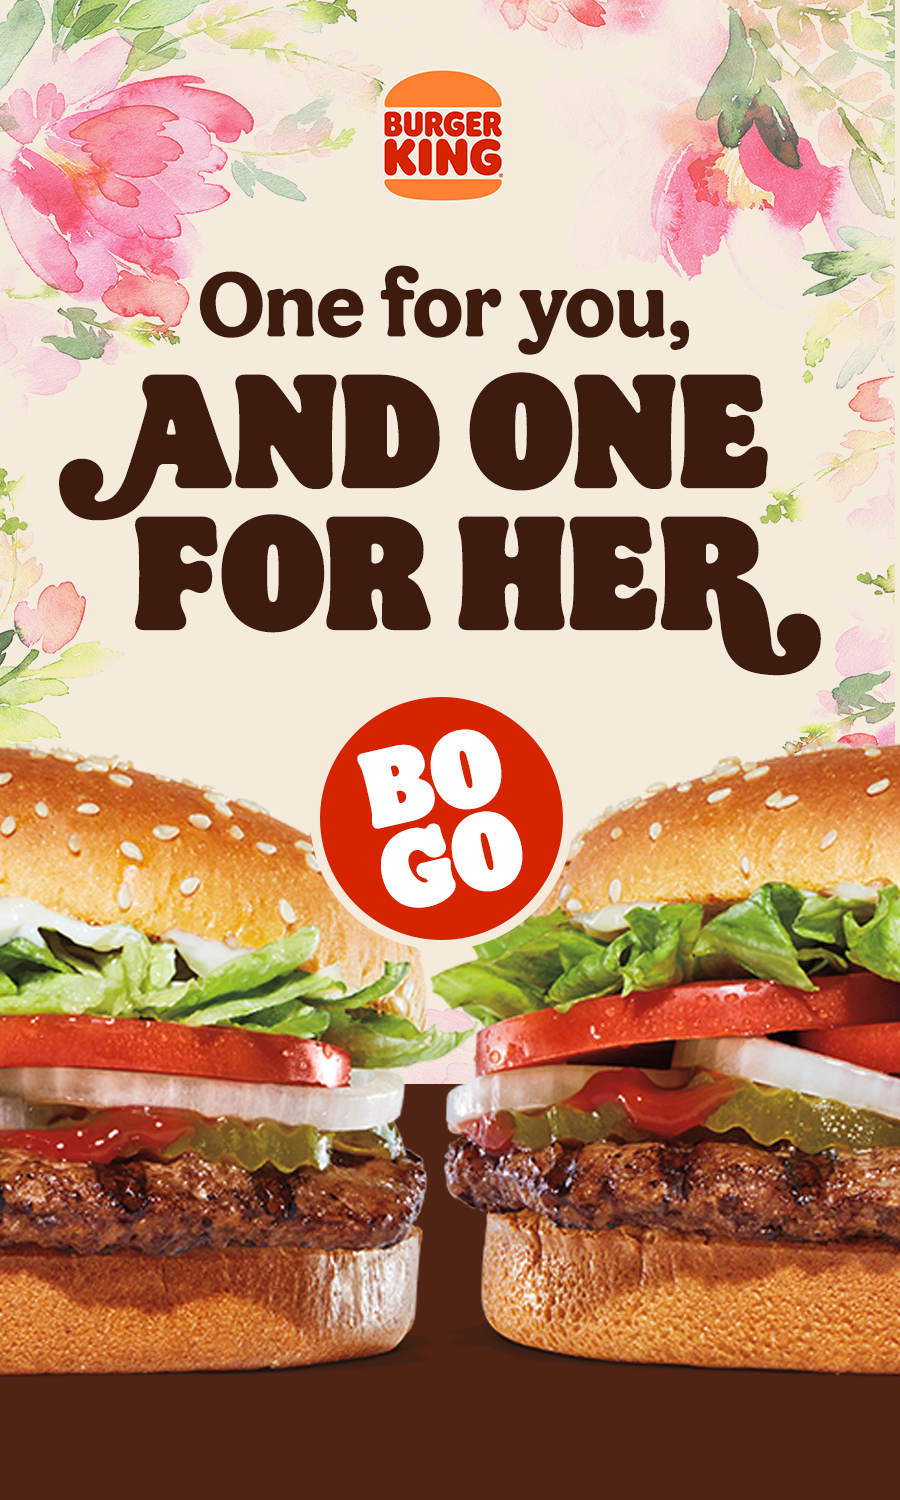 Burger King is offering customers a buy one, get one deal on Whoppers on May 12 in honor of Mother's Day.